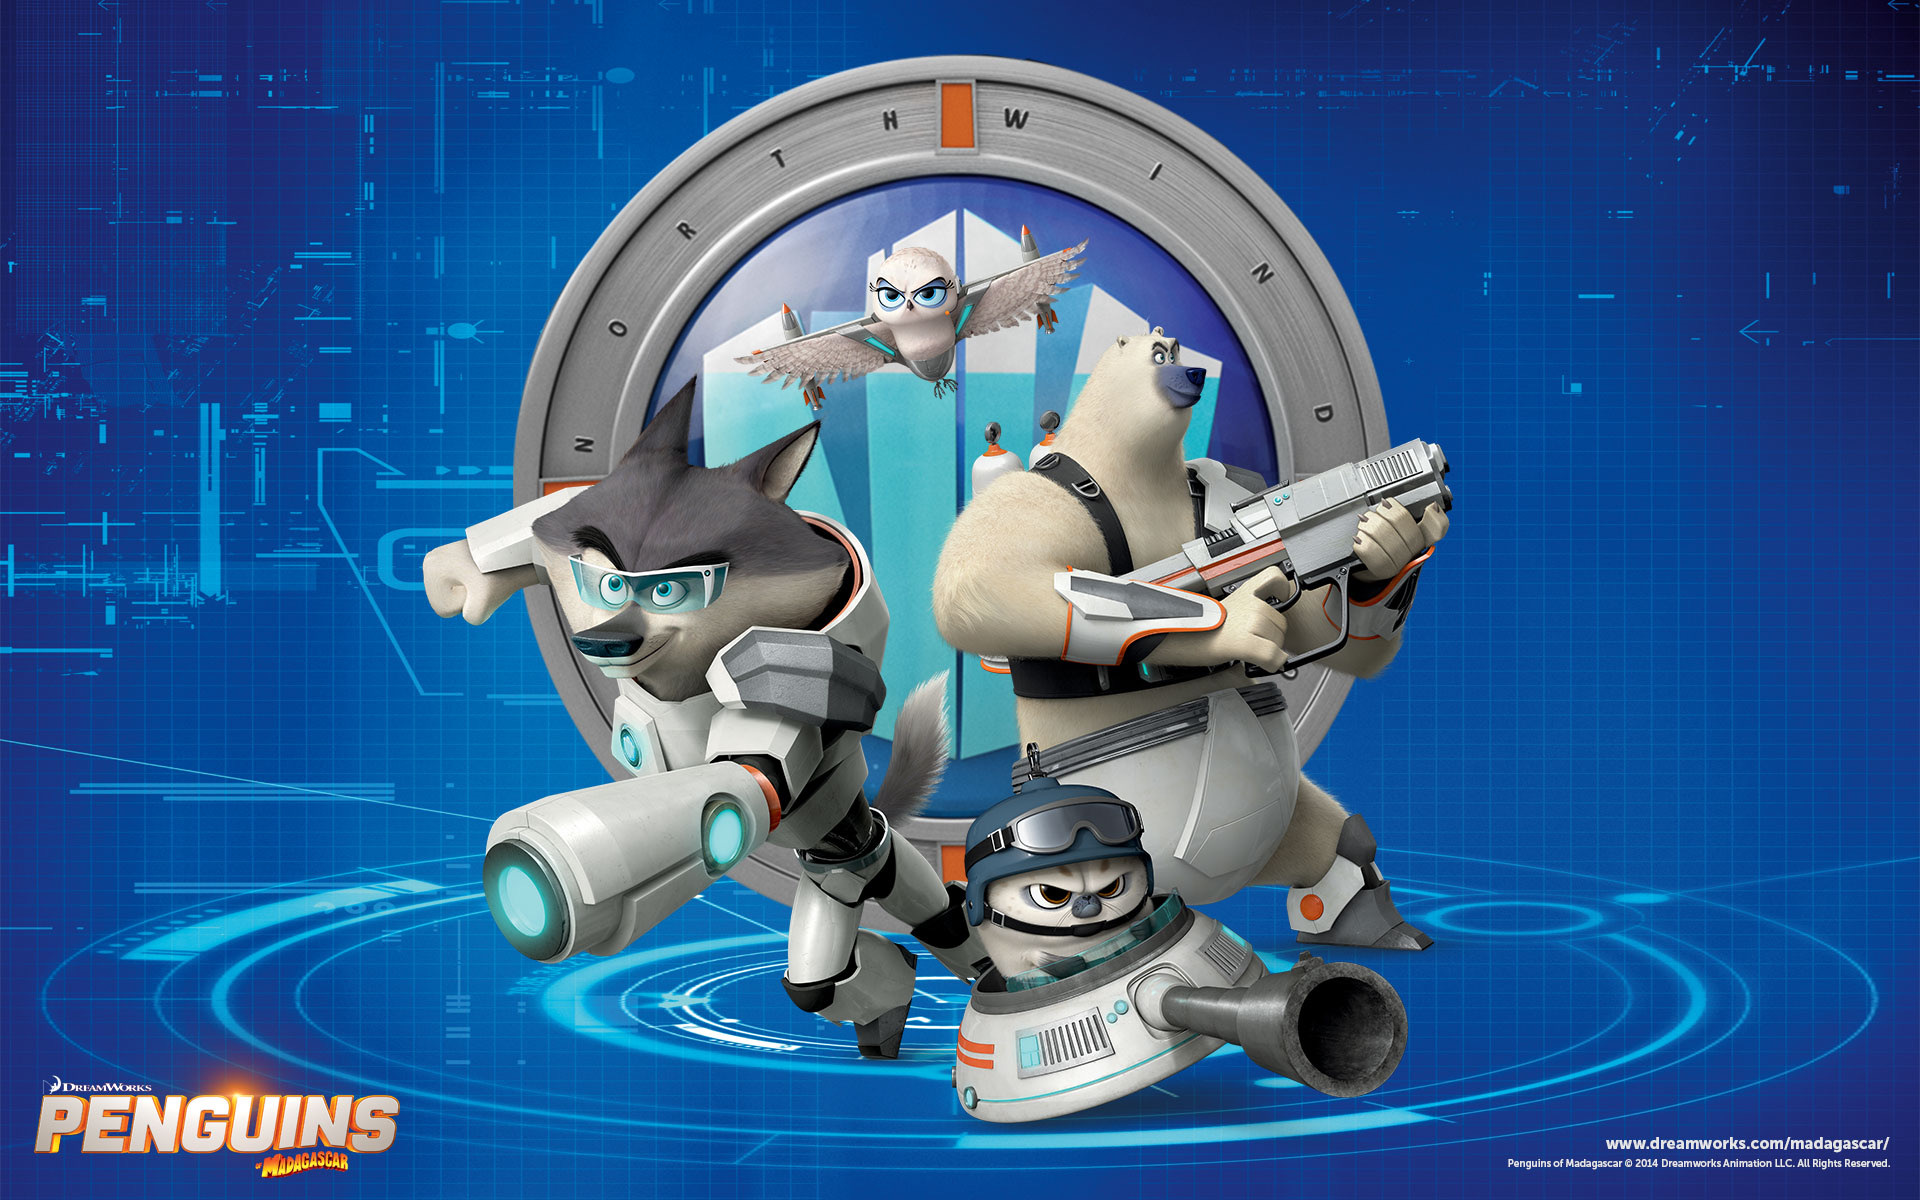 Promotional image from the movie “Penguins of Madigascar” with the characters who make up the north wind”